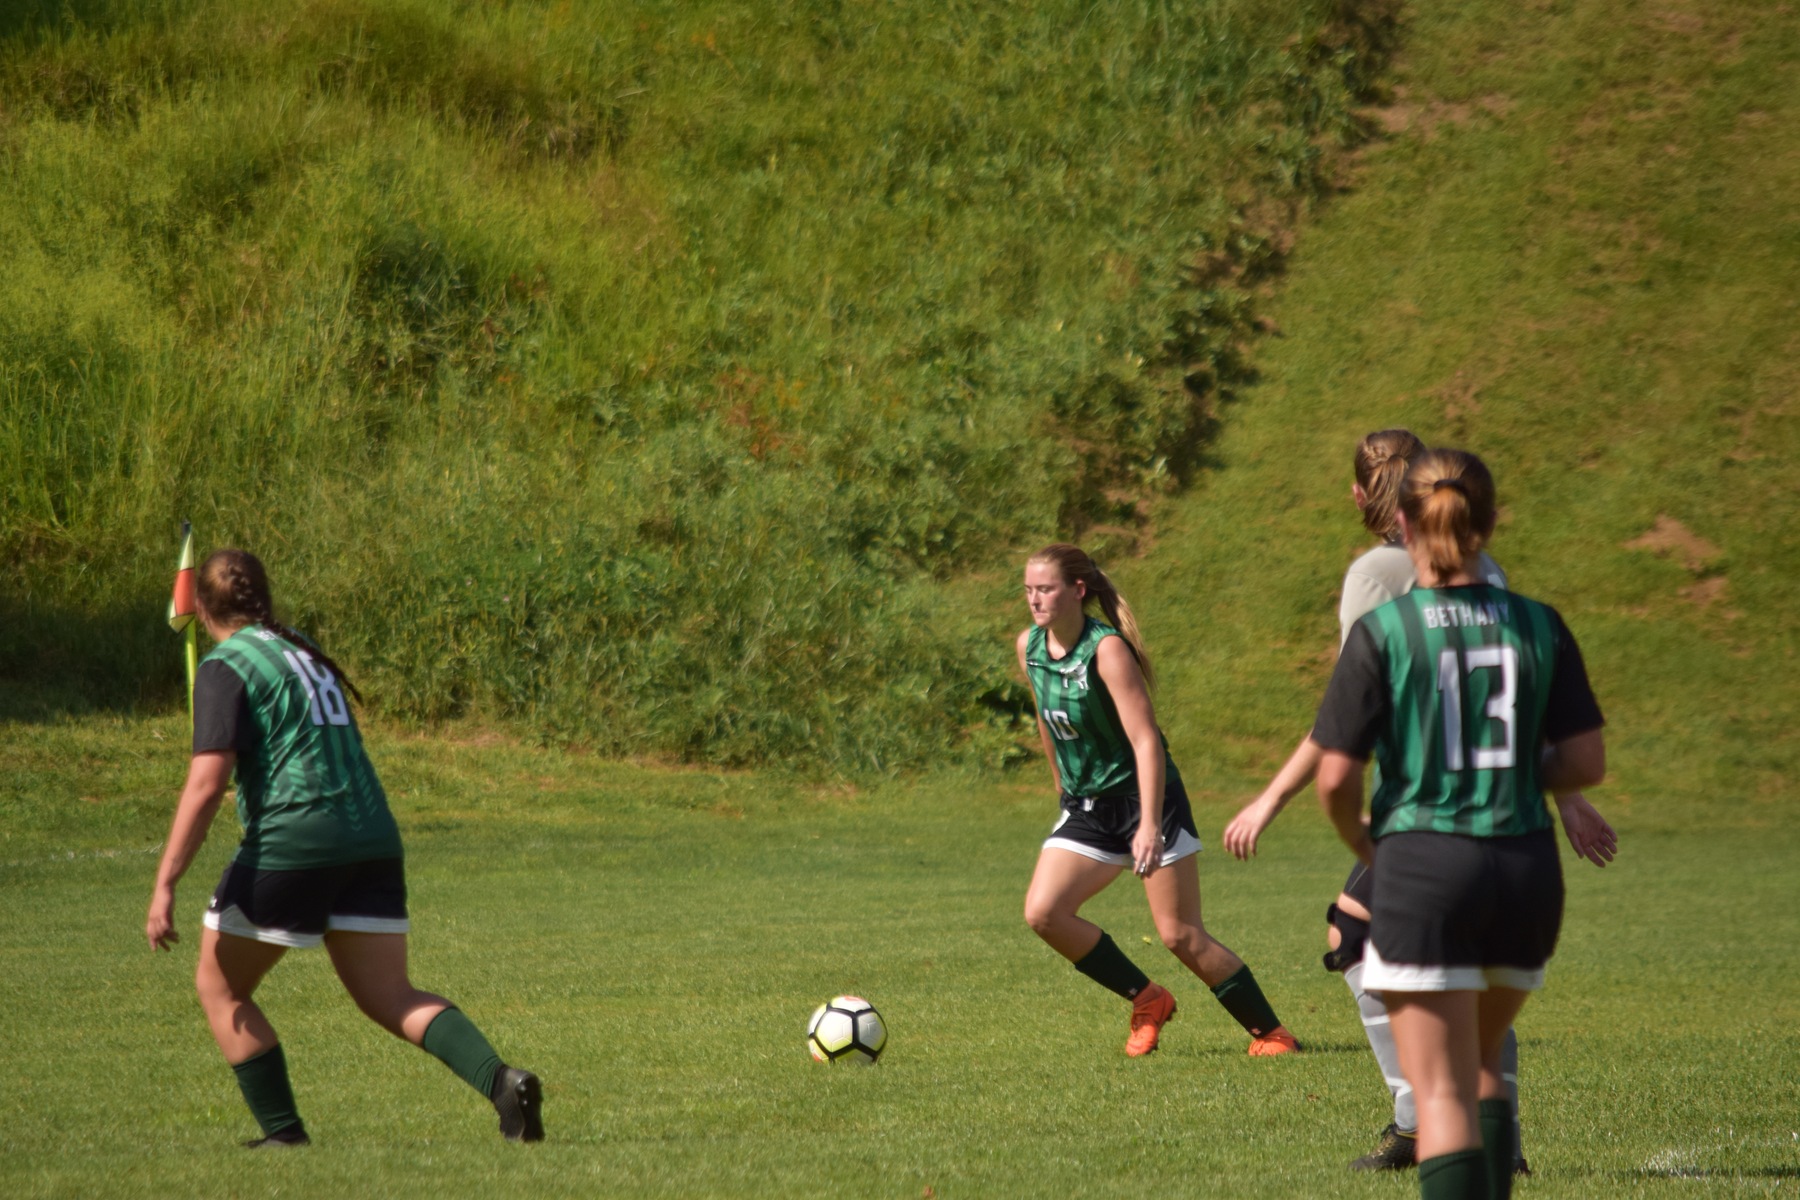 Bethany Blanked by Wooster College, 4-0